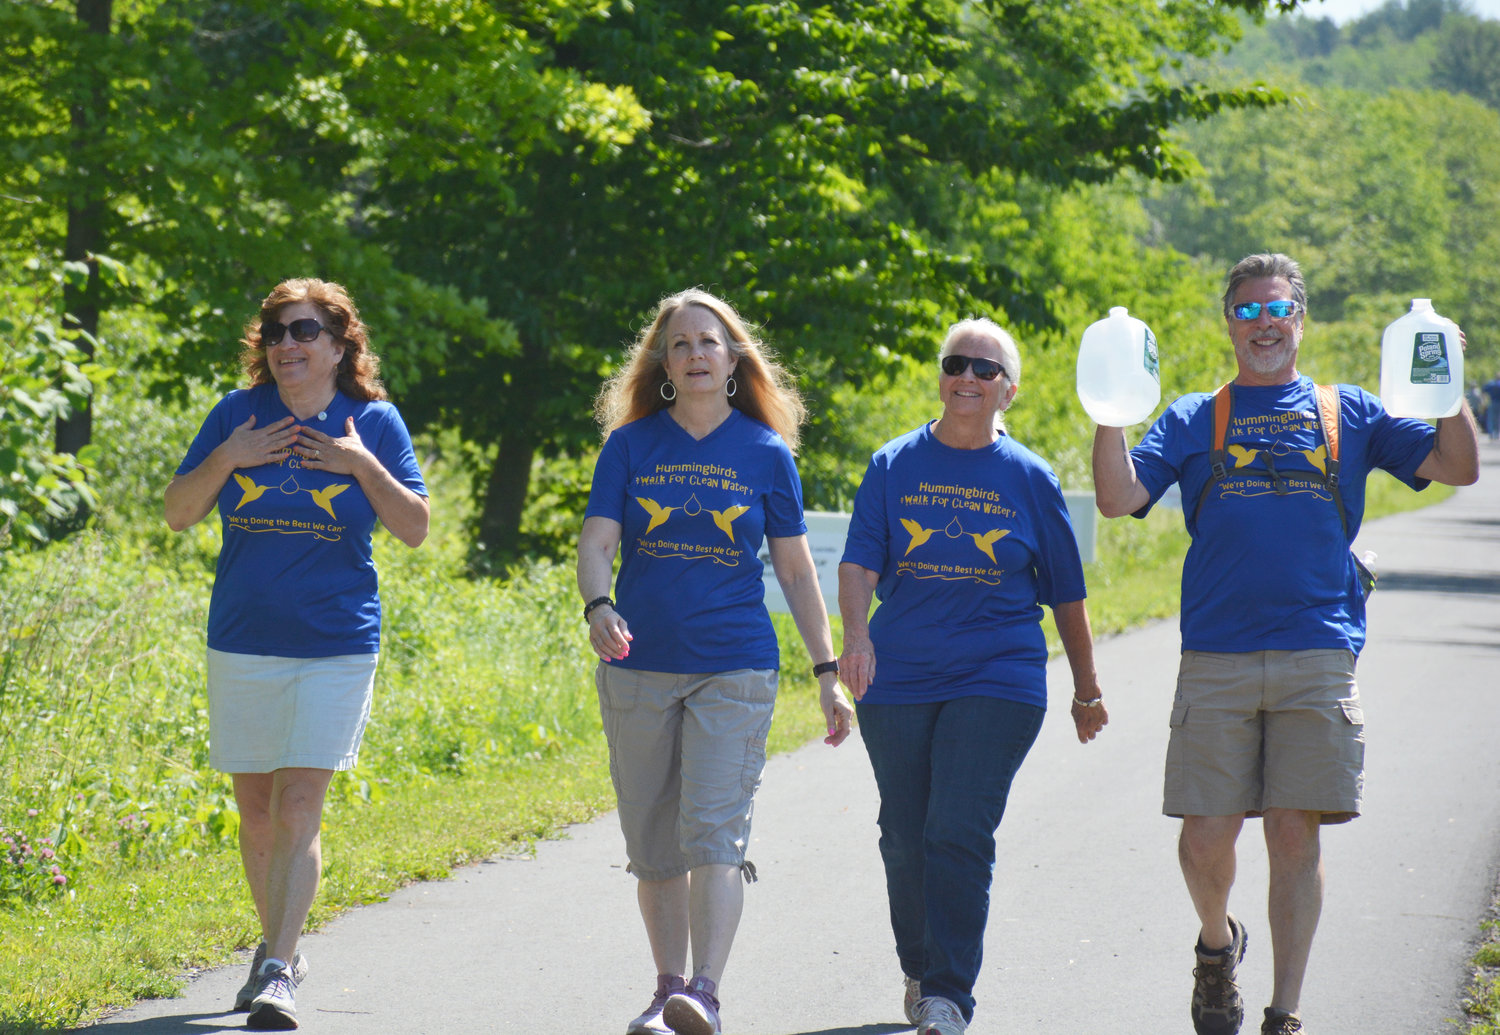 From left, the team of Hummingbird award recipients Judy Siegel (far left), Tony Marmo (far right), Lee Ann Marmo (second from left) and Liberty NY Rotary Club Treasurer Sue Kraycer, complete the Hummingbirds Walk for Clean Water.